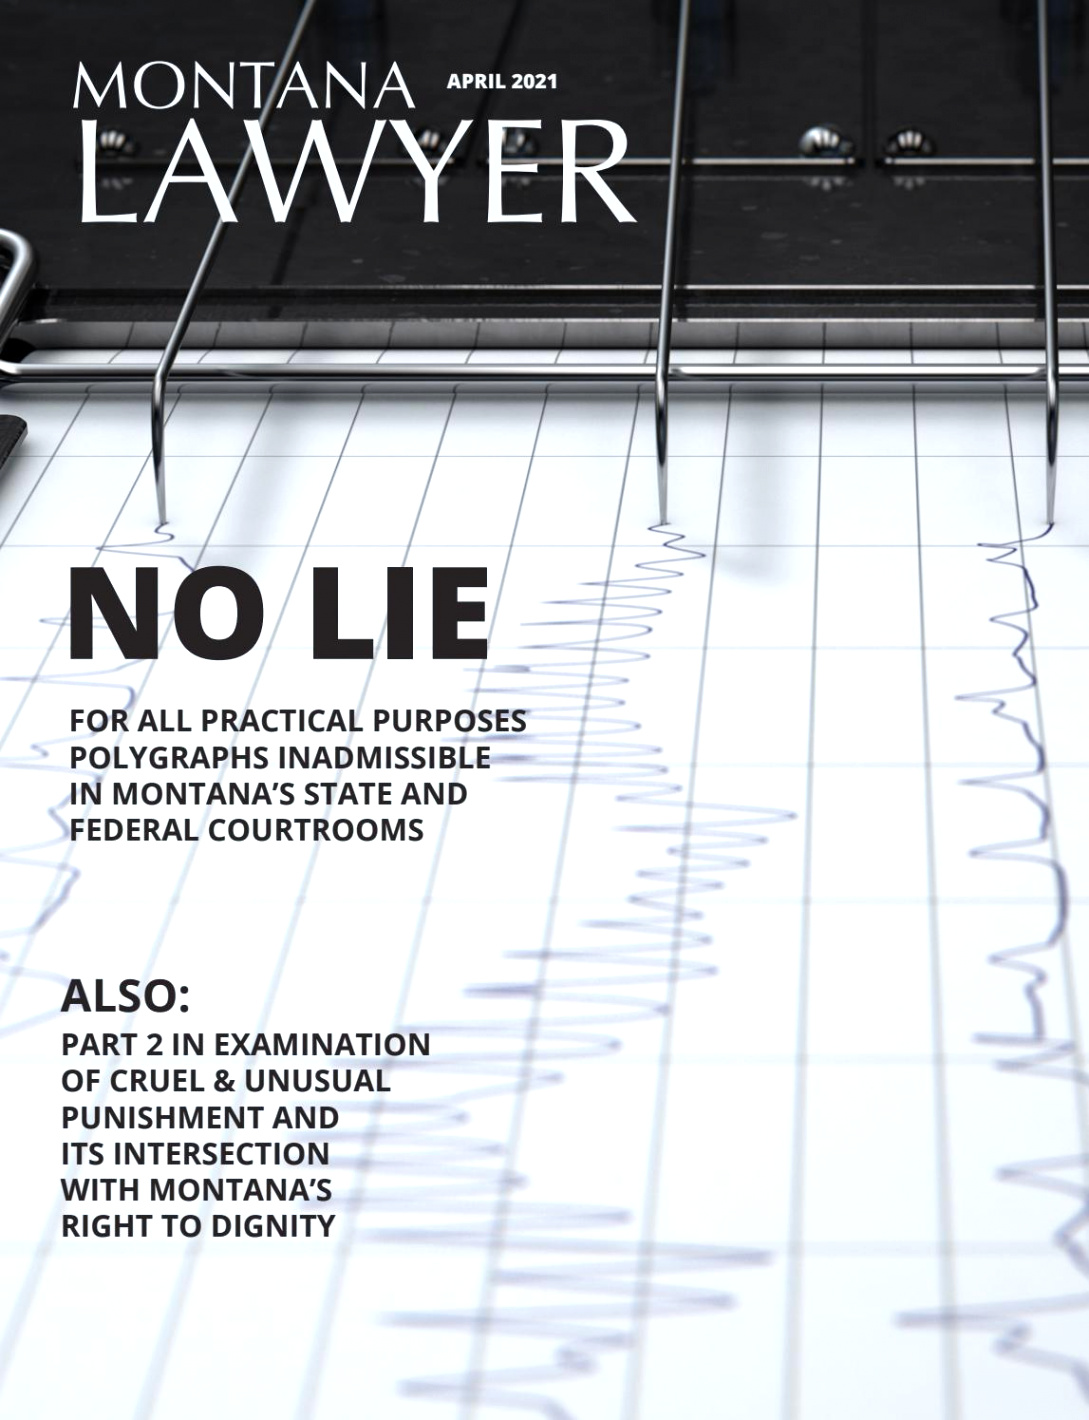 Fergus Mt Car Accident Lawyer Dans April 2021 Montana Lawyer by State Bar Of Montana - issuu